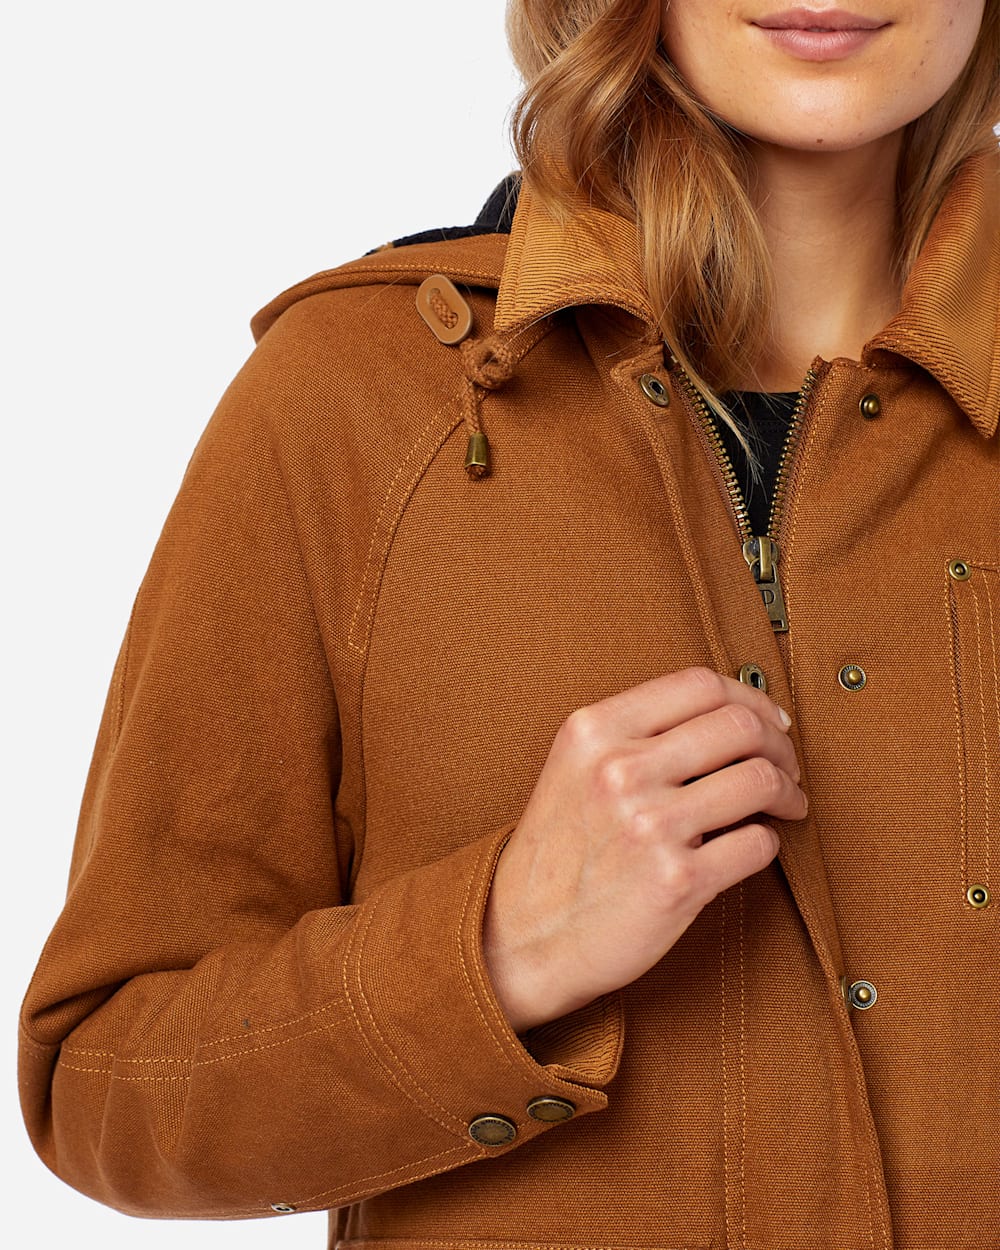 ALTERNATE VIEW OF WOMEN'S ST HELENA SHERPA-LINED COAT IN WHISKEY image number 4